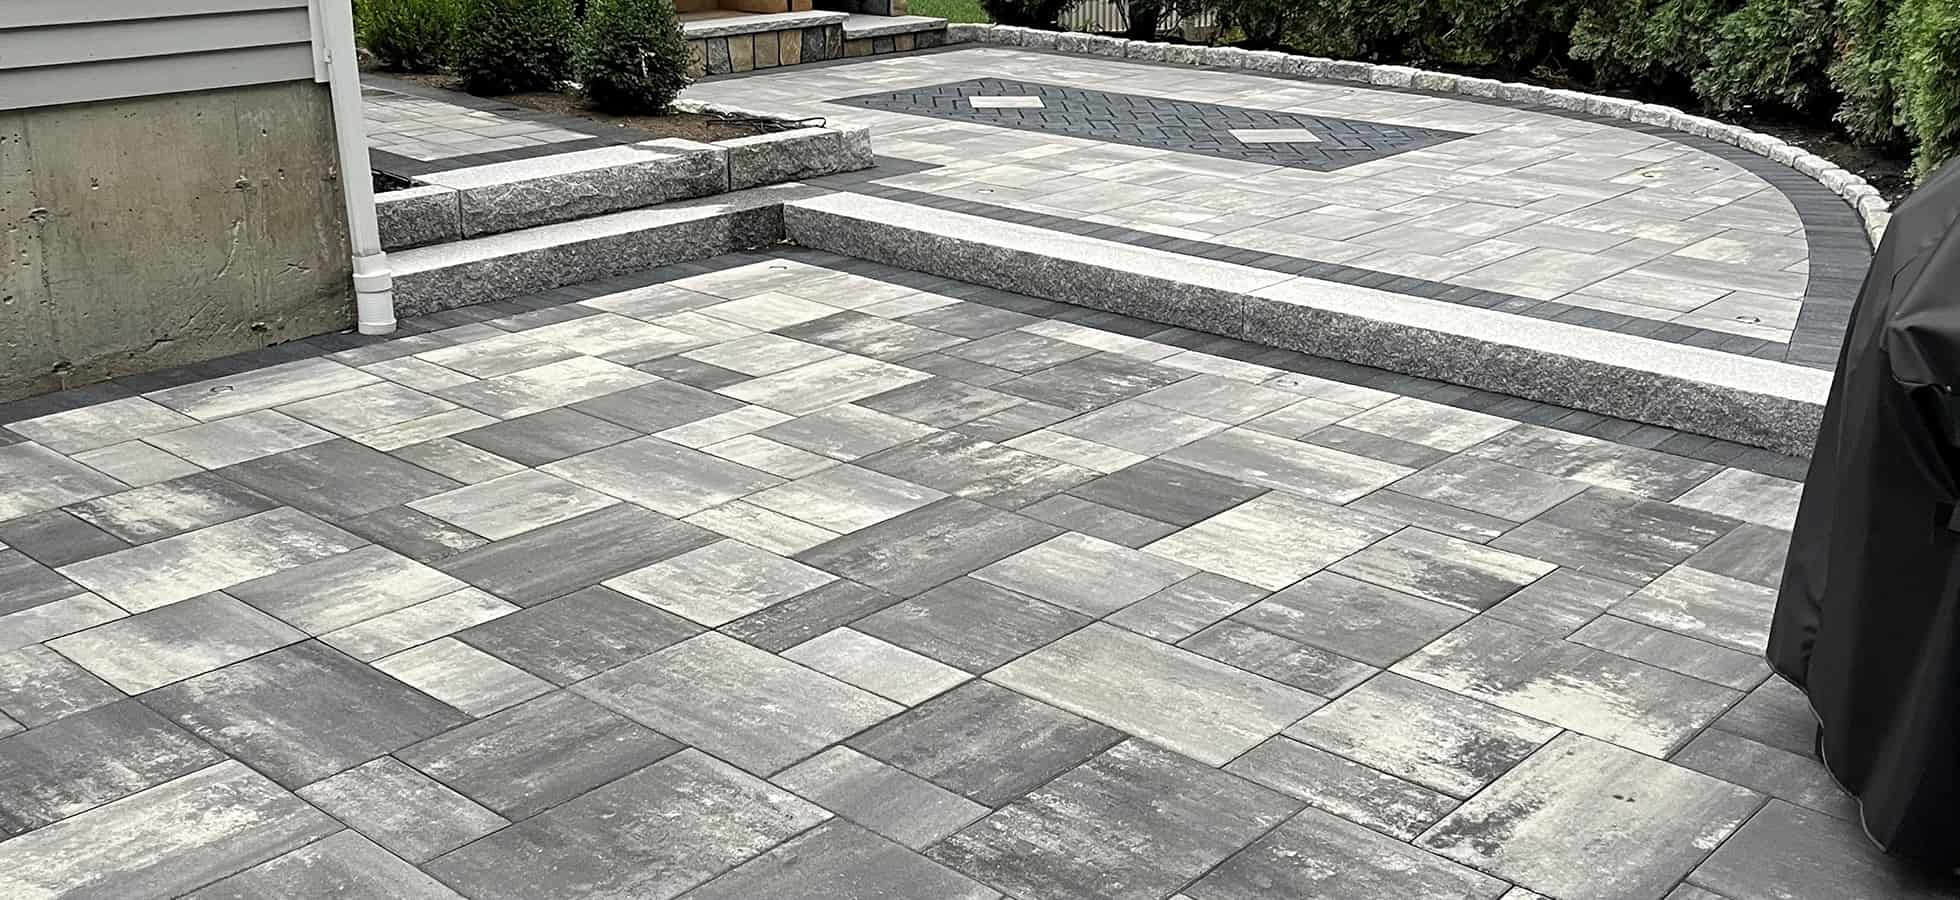 How to Choose the Right Hardscaping Materials for Your Project